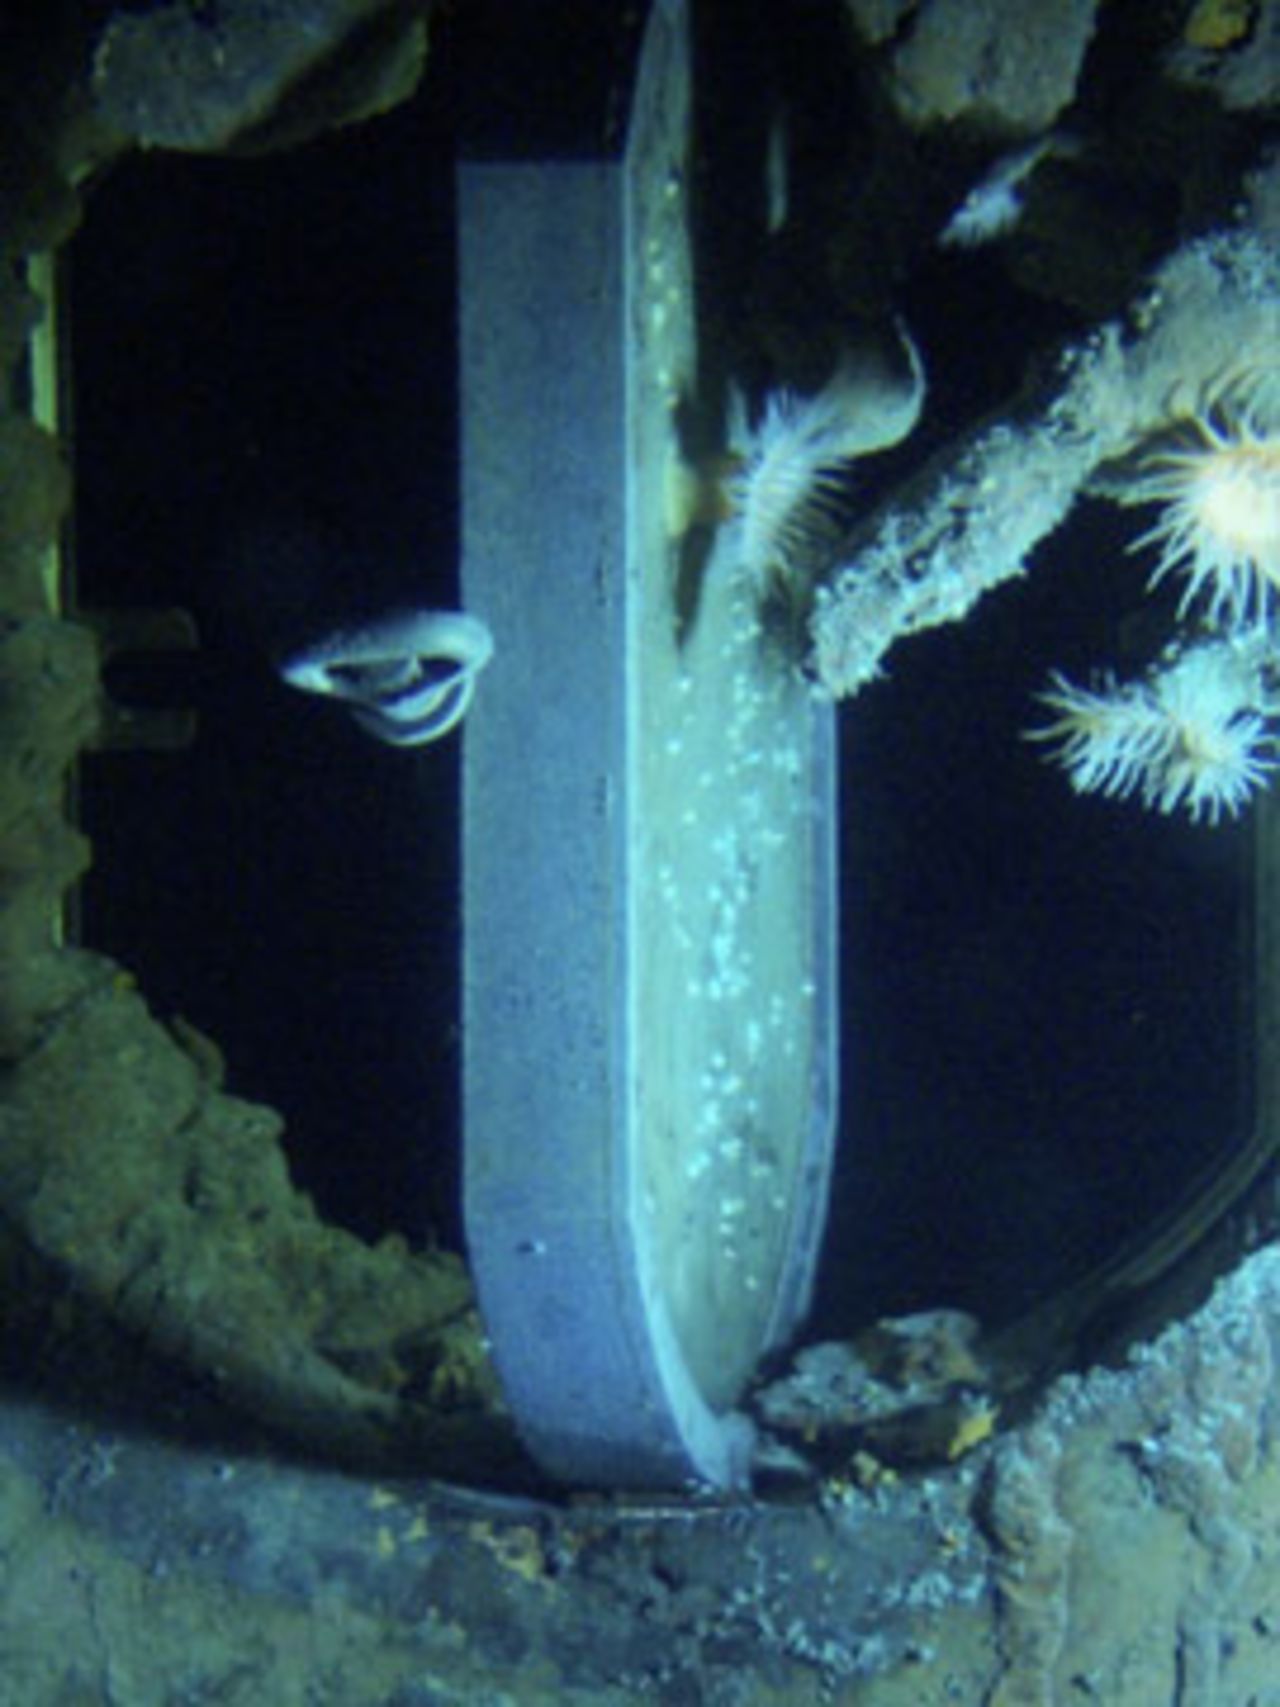 Underwater marine life grows upon an open porthole of the Titanic.